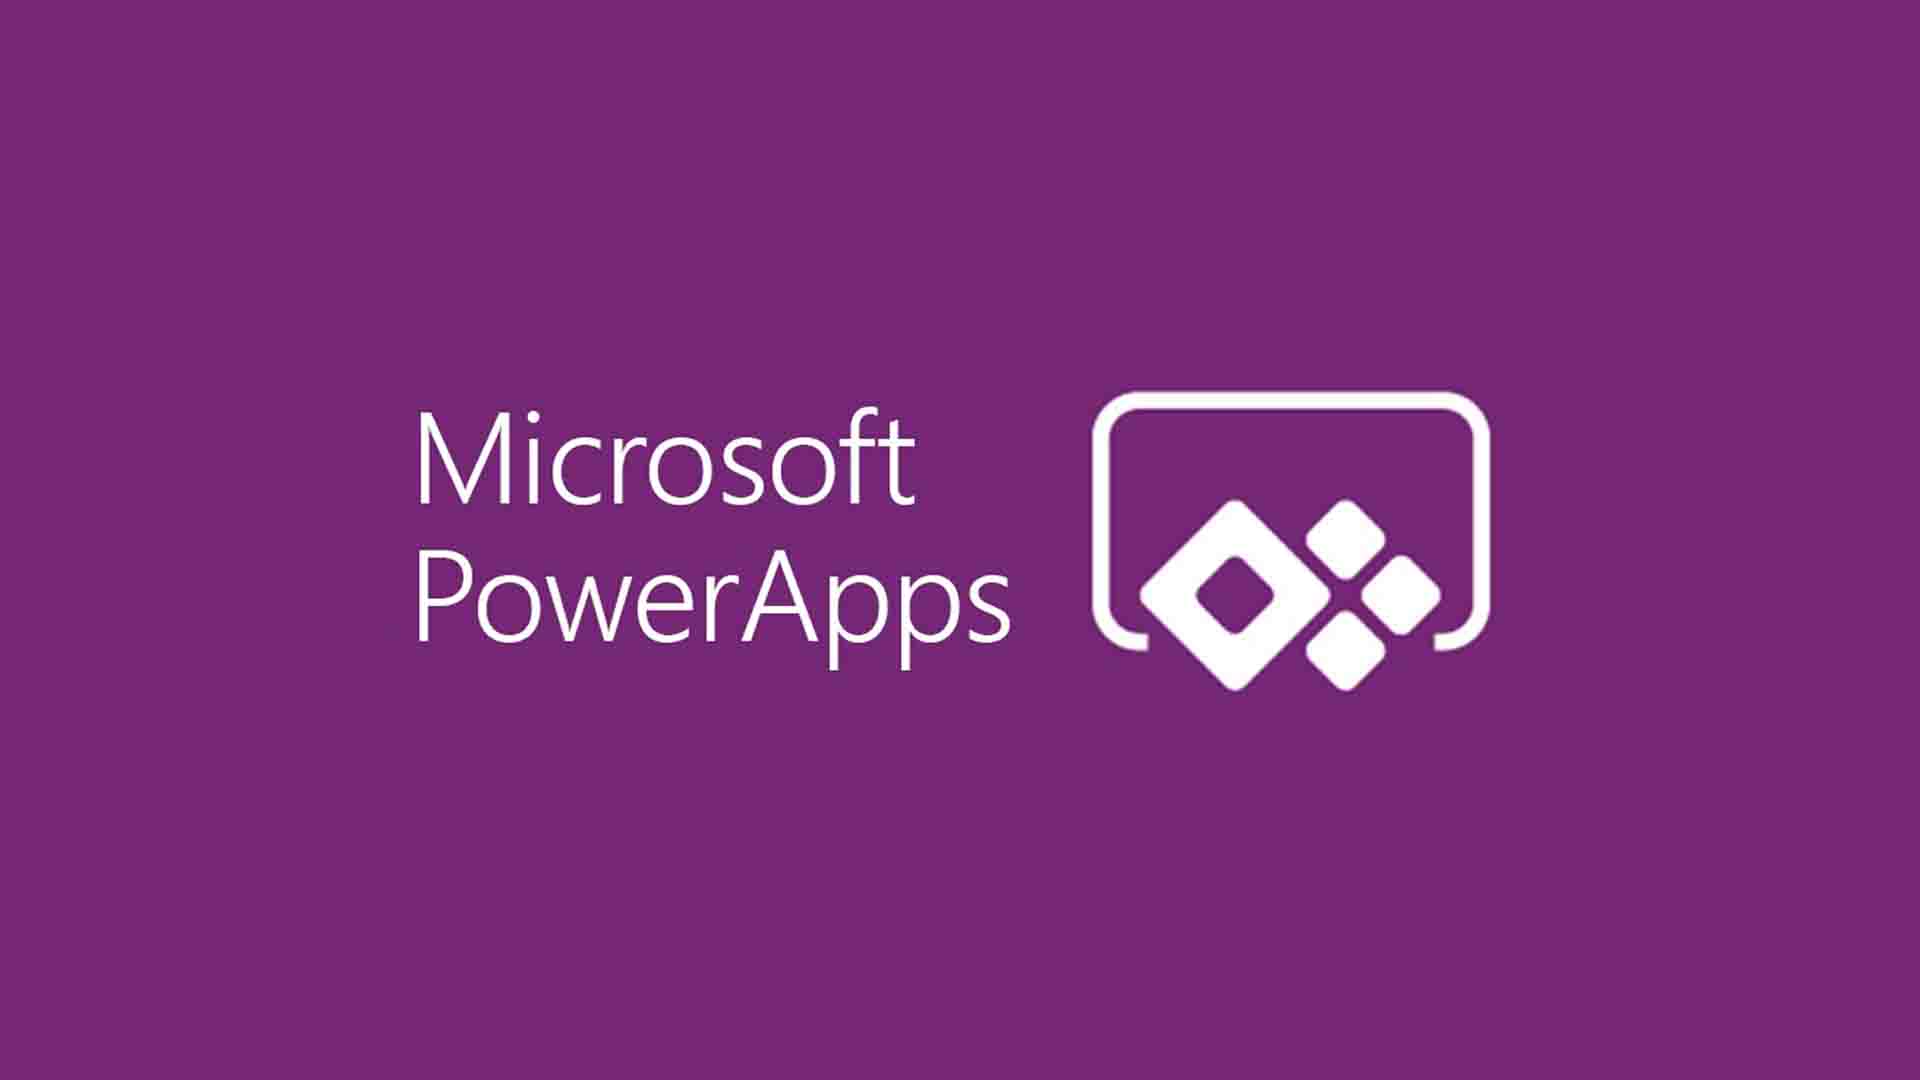 9 highly creative PowerApps for your business